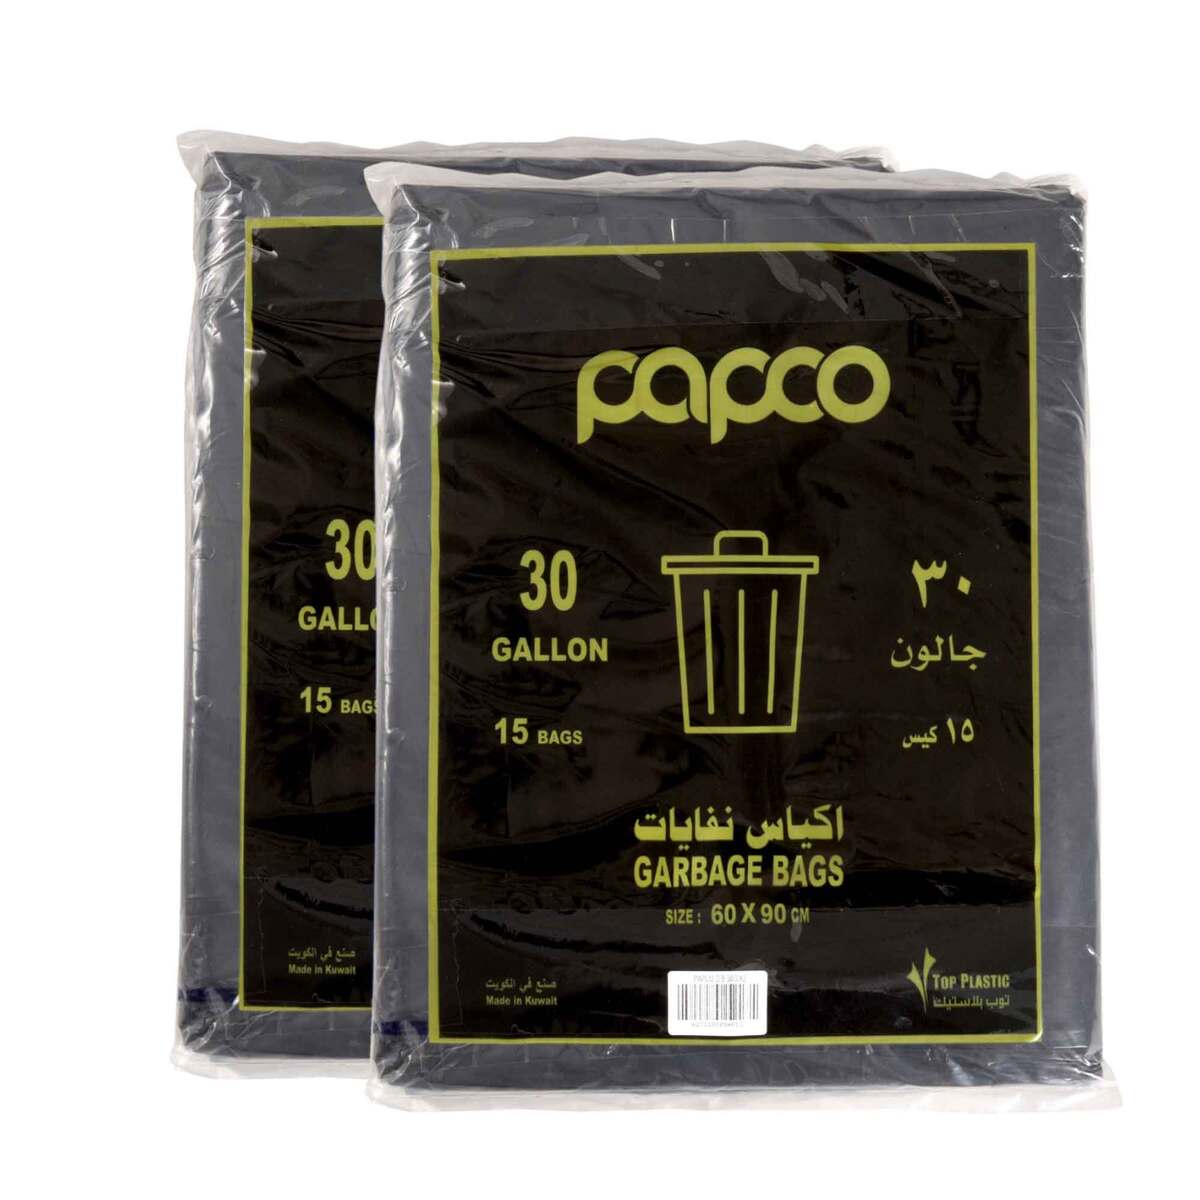 Papco Garbage Bags 60 x 90cm 30 Gallons Value Pack 2 x 15 pcs